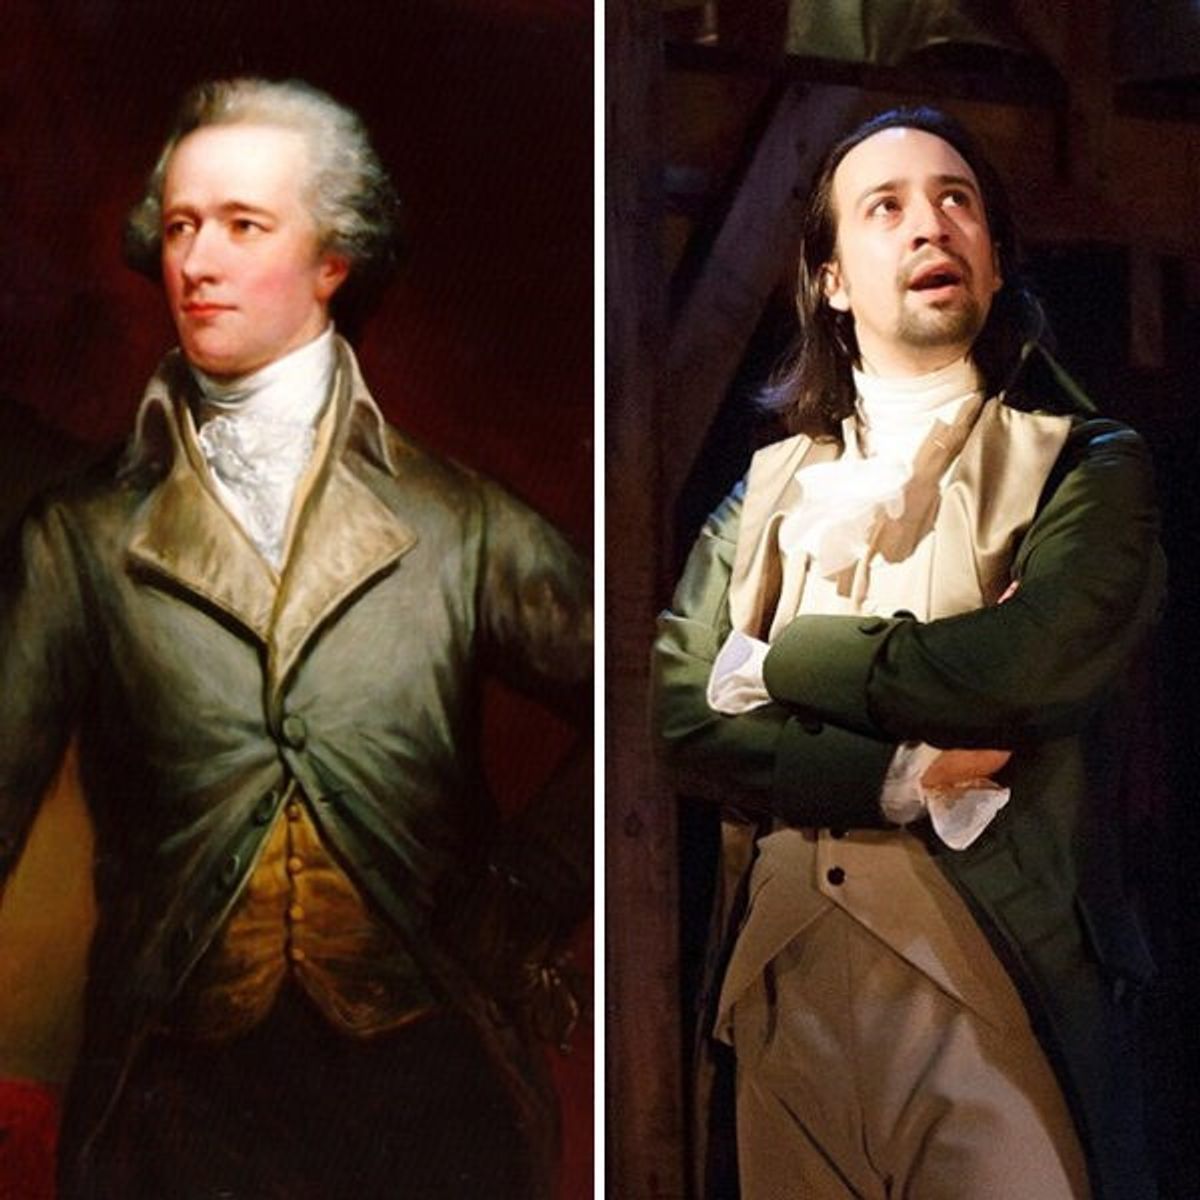 Hamilton: Bridging the Divide Between the Founding Fathers and Modern Society